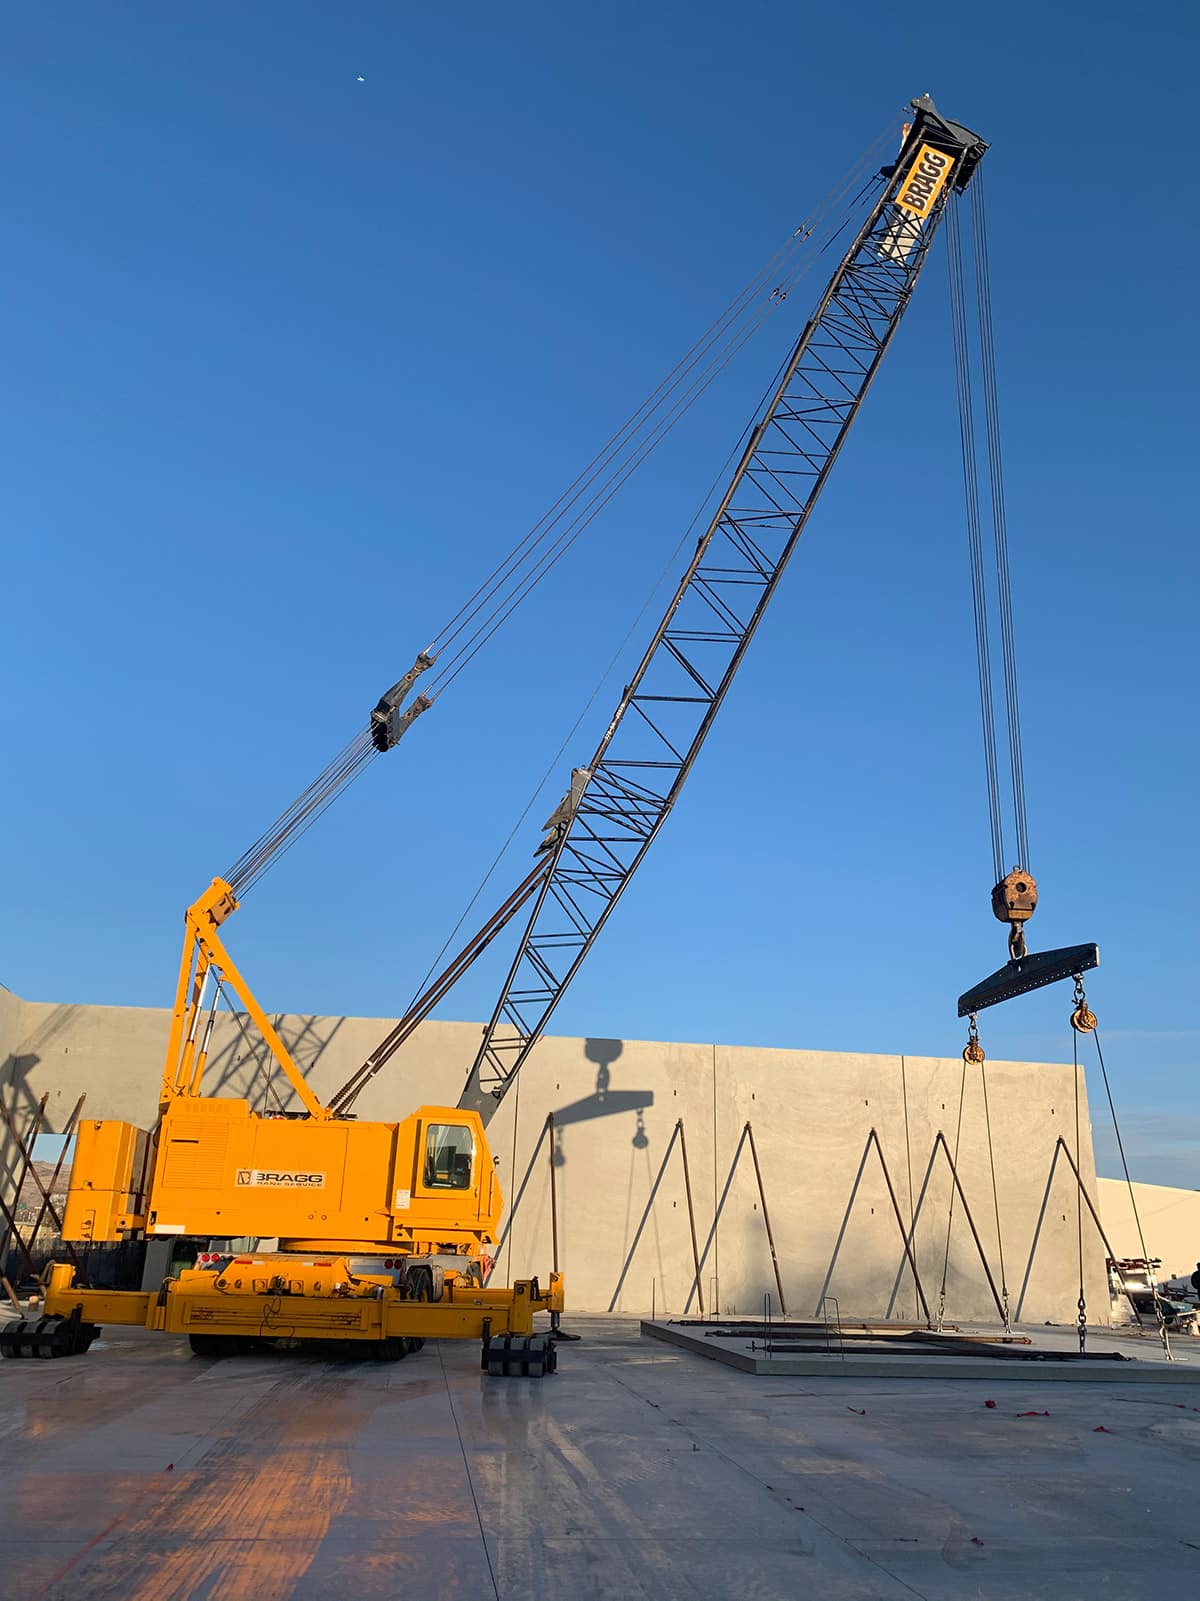 crane being used at site